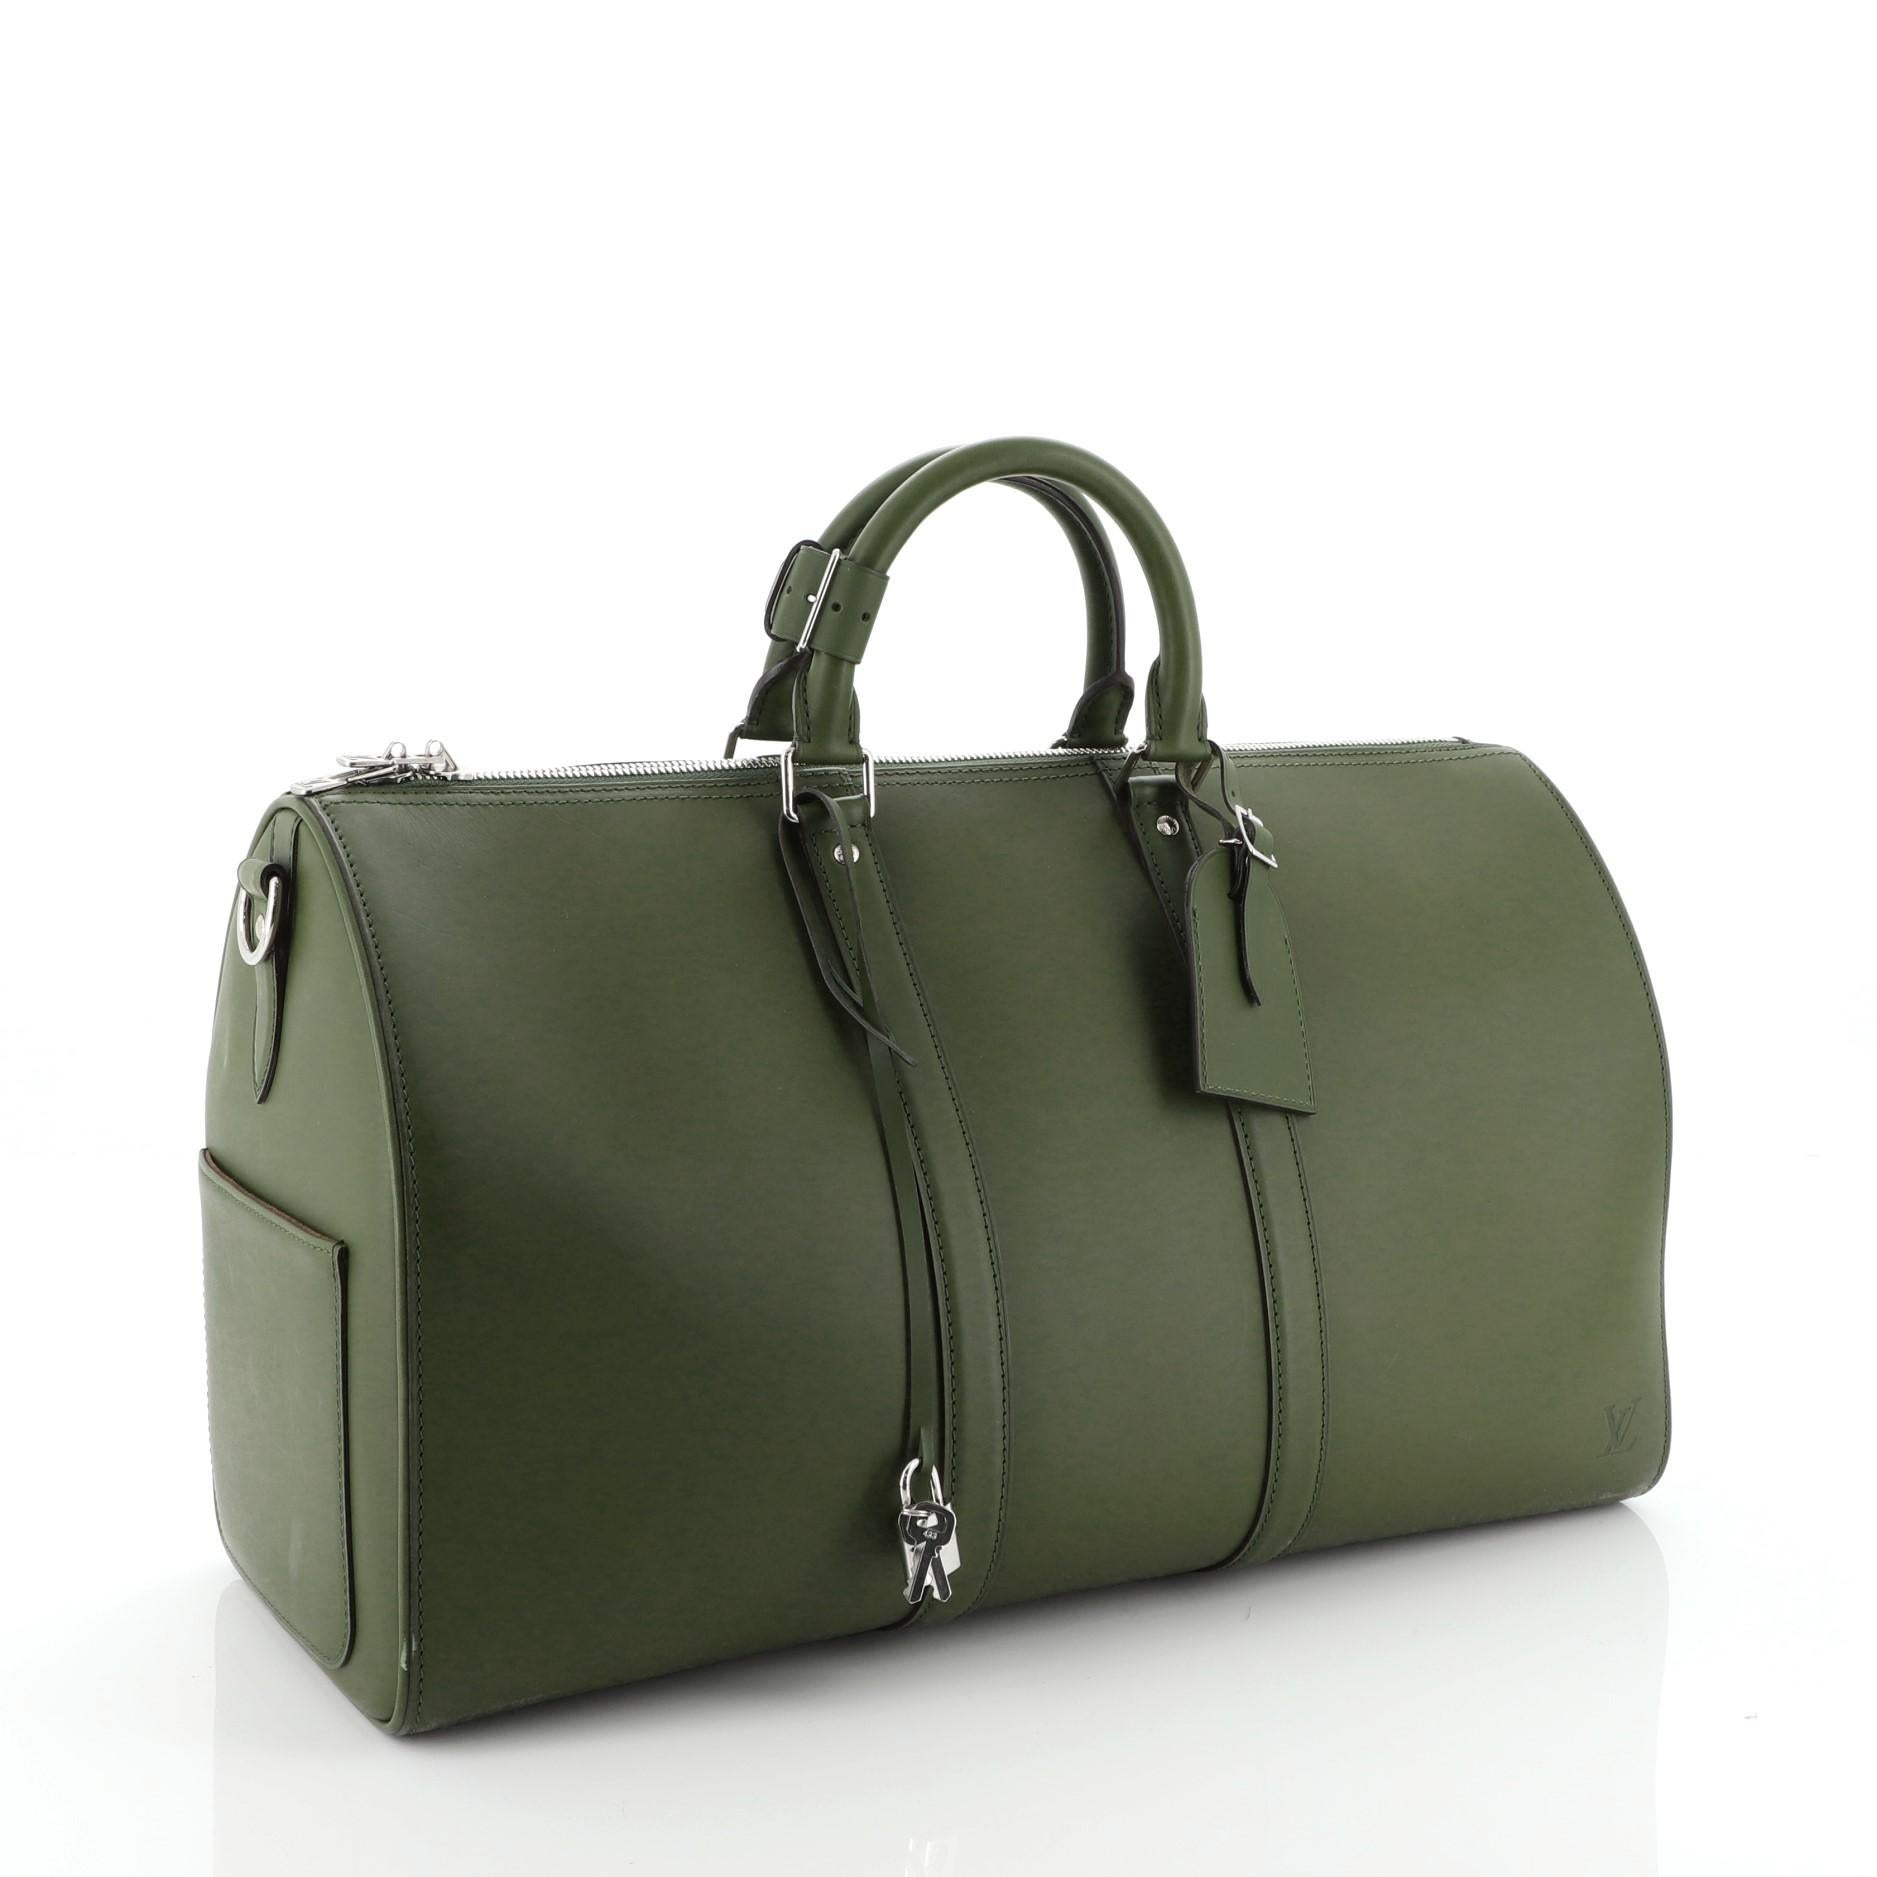 This Louis Vuitton Keepall Bandouliere Bag Nomade Leather 45, crafted in green leather, features dual rolled handles and silver-tone hardware. Its zip closure opens to a brown microfiber interior. Authenticity code reads: BA4122. 

Estimated Retail